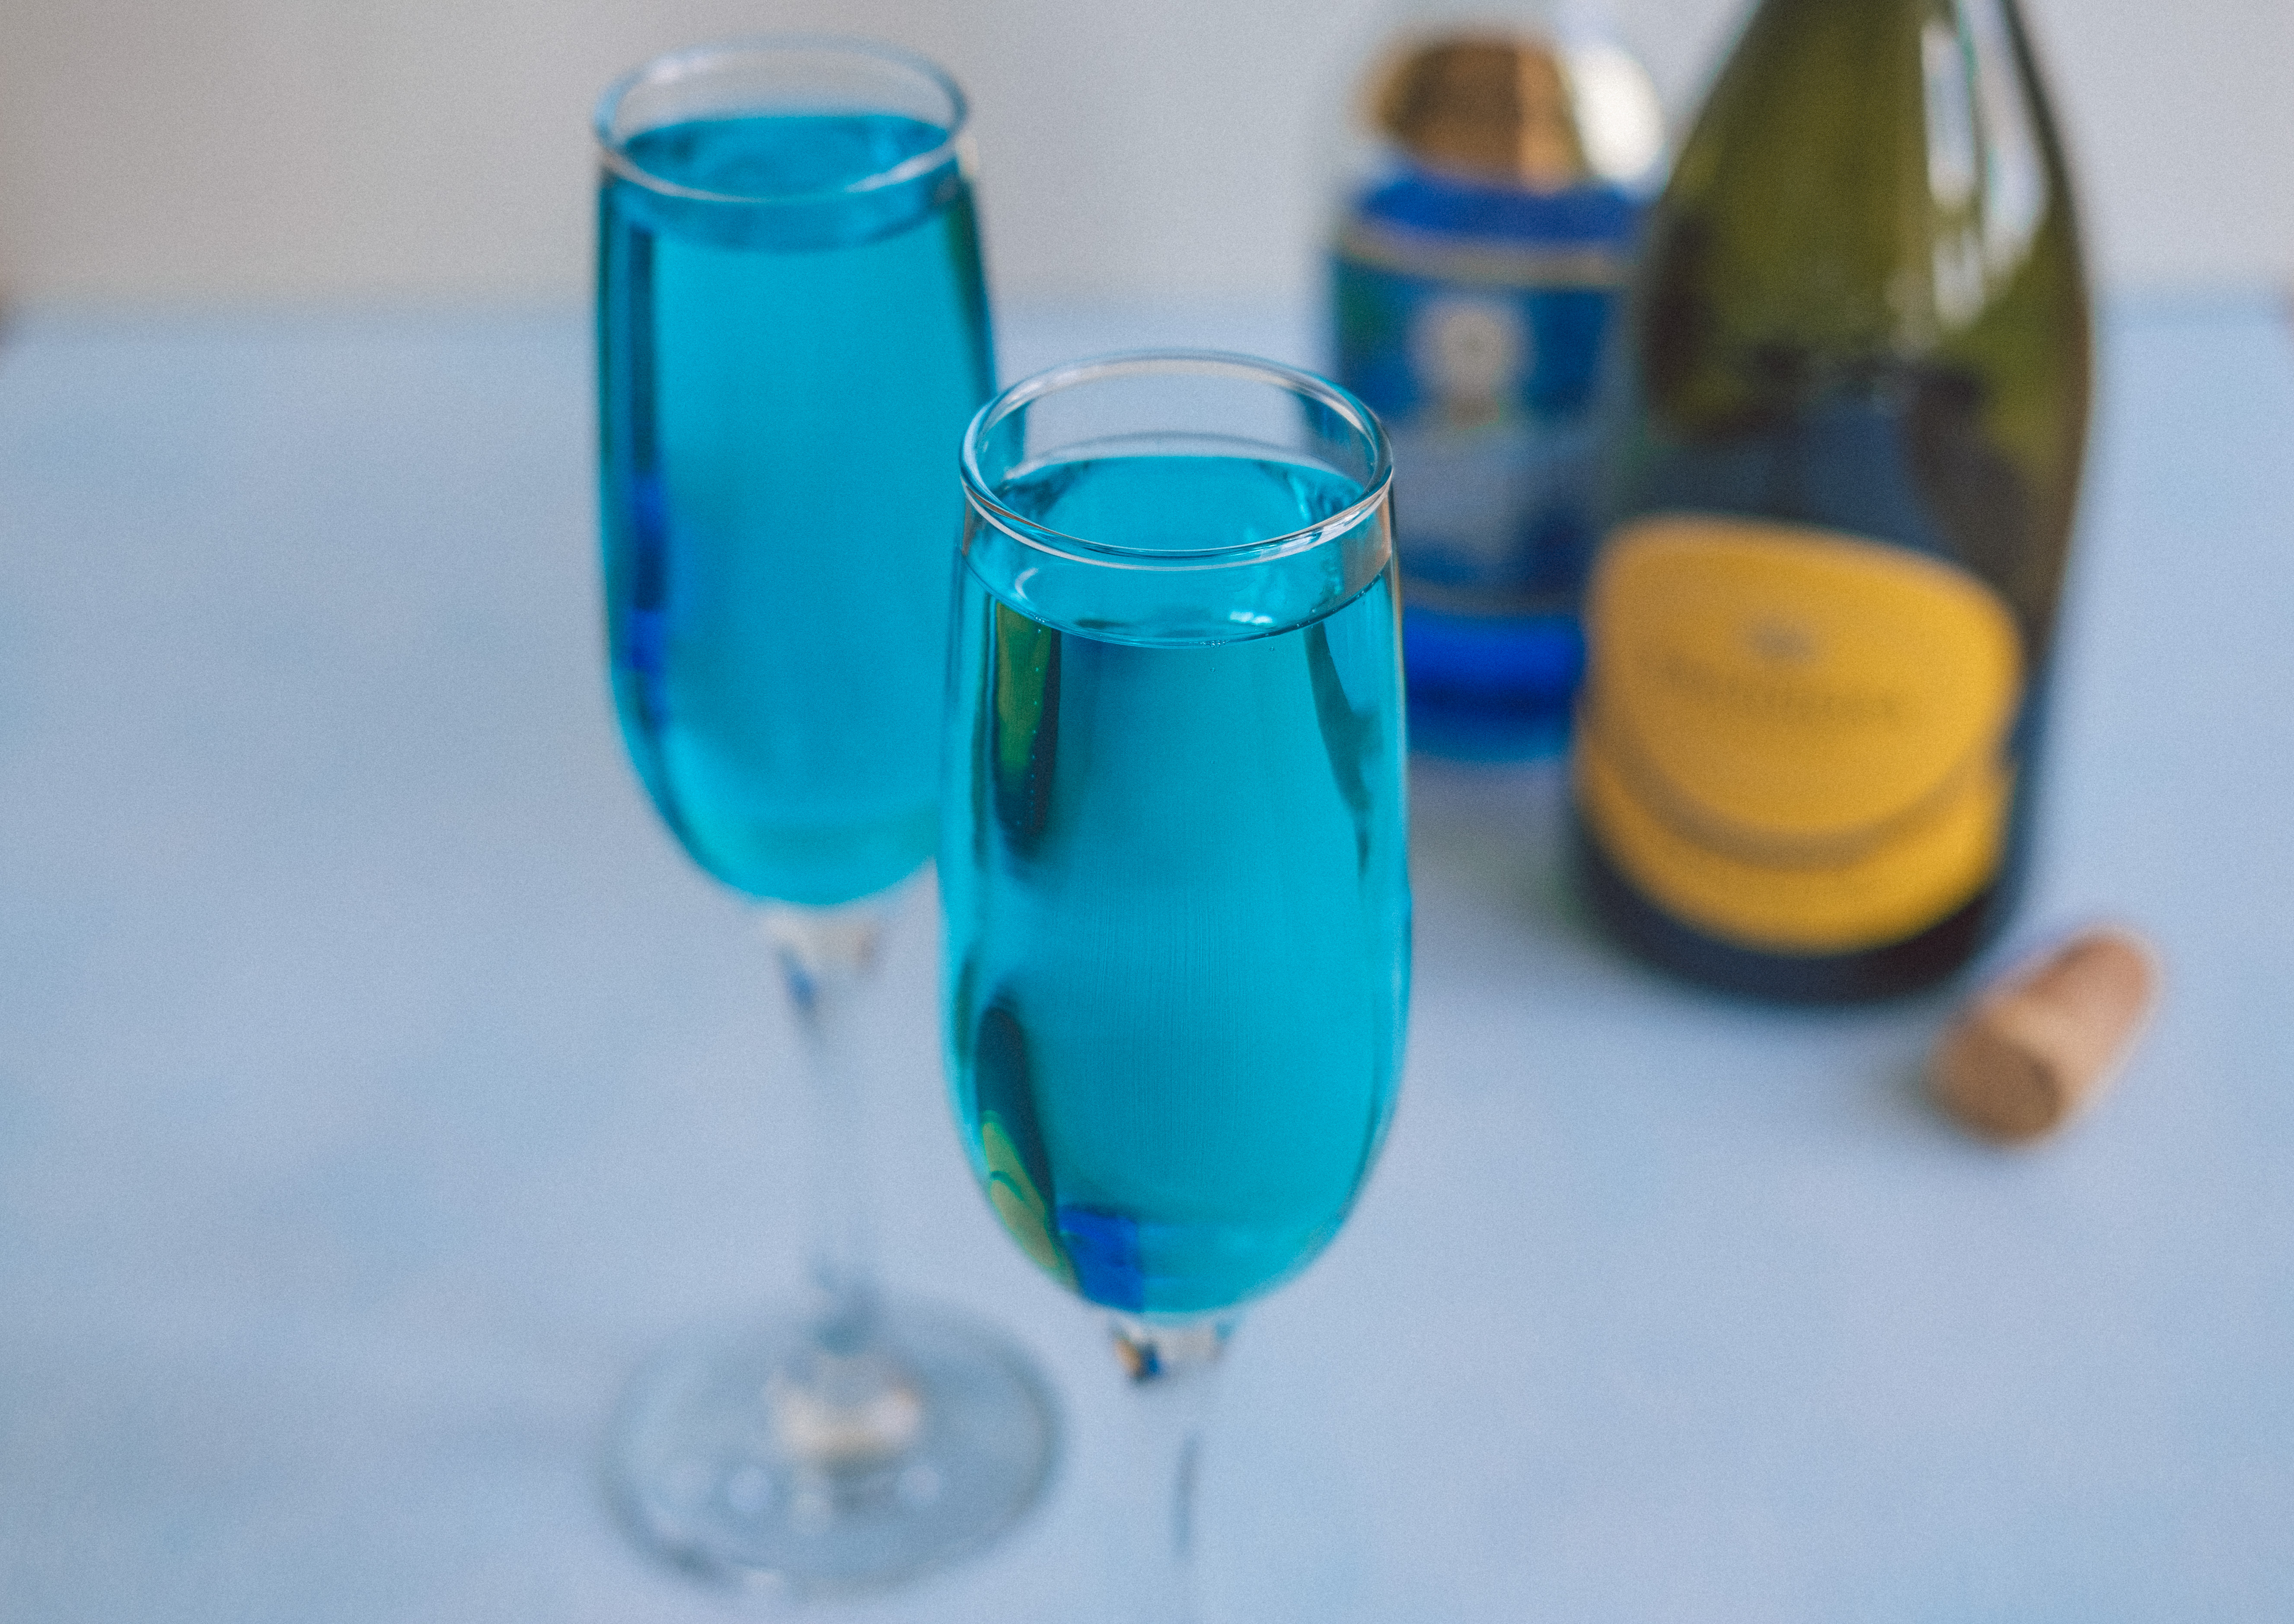 https://www.yuzubakes.com/sites/yuzubakes.com/files/featured-images/blue-mimosa-tiffany-mimosa-in-two-prosecco-glasses.jpg